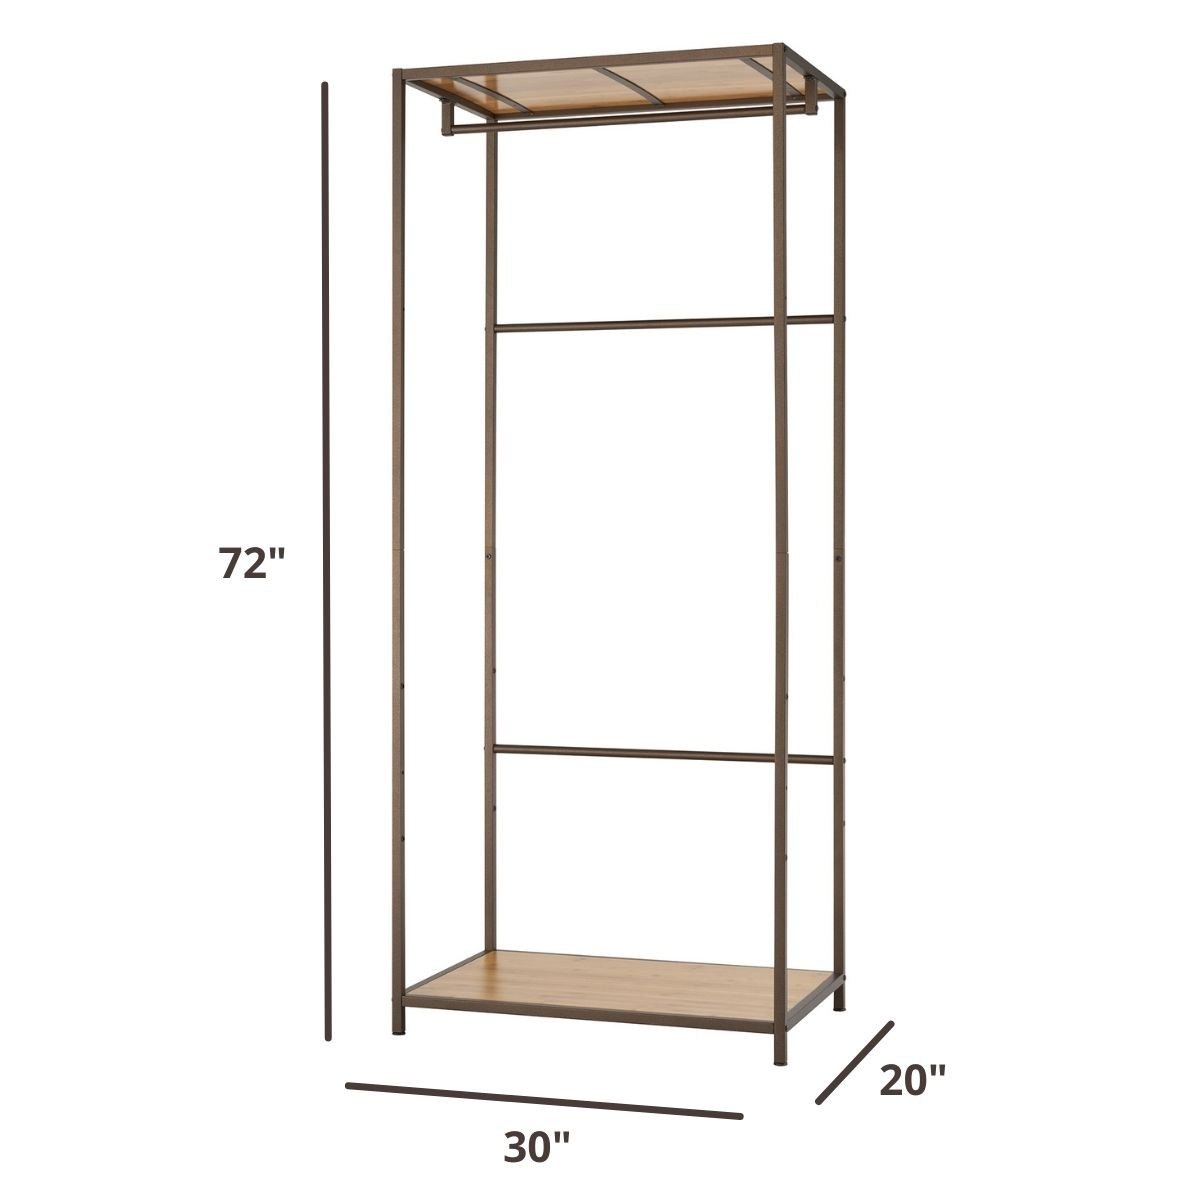 bronze garment rack dimensions: 72 inches tall by 30 inches wide by 20 inches deep